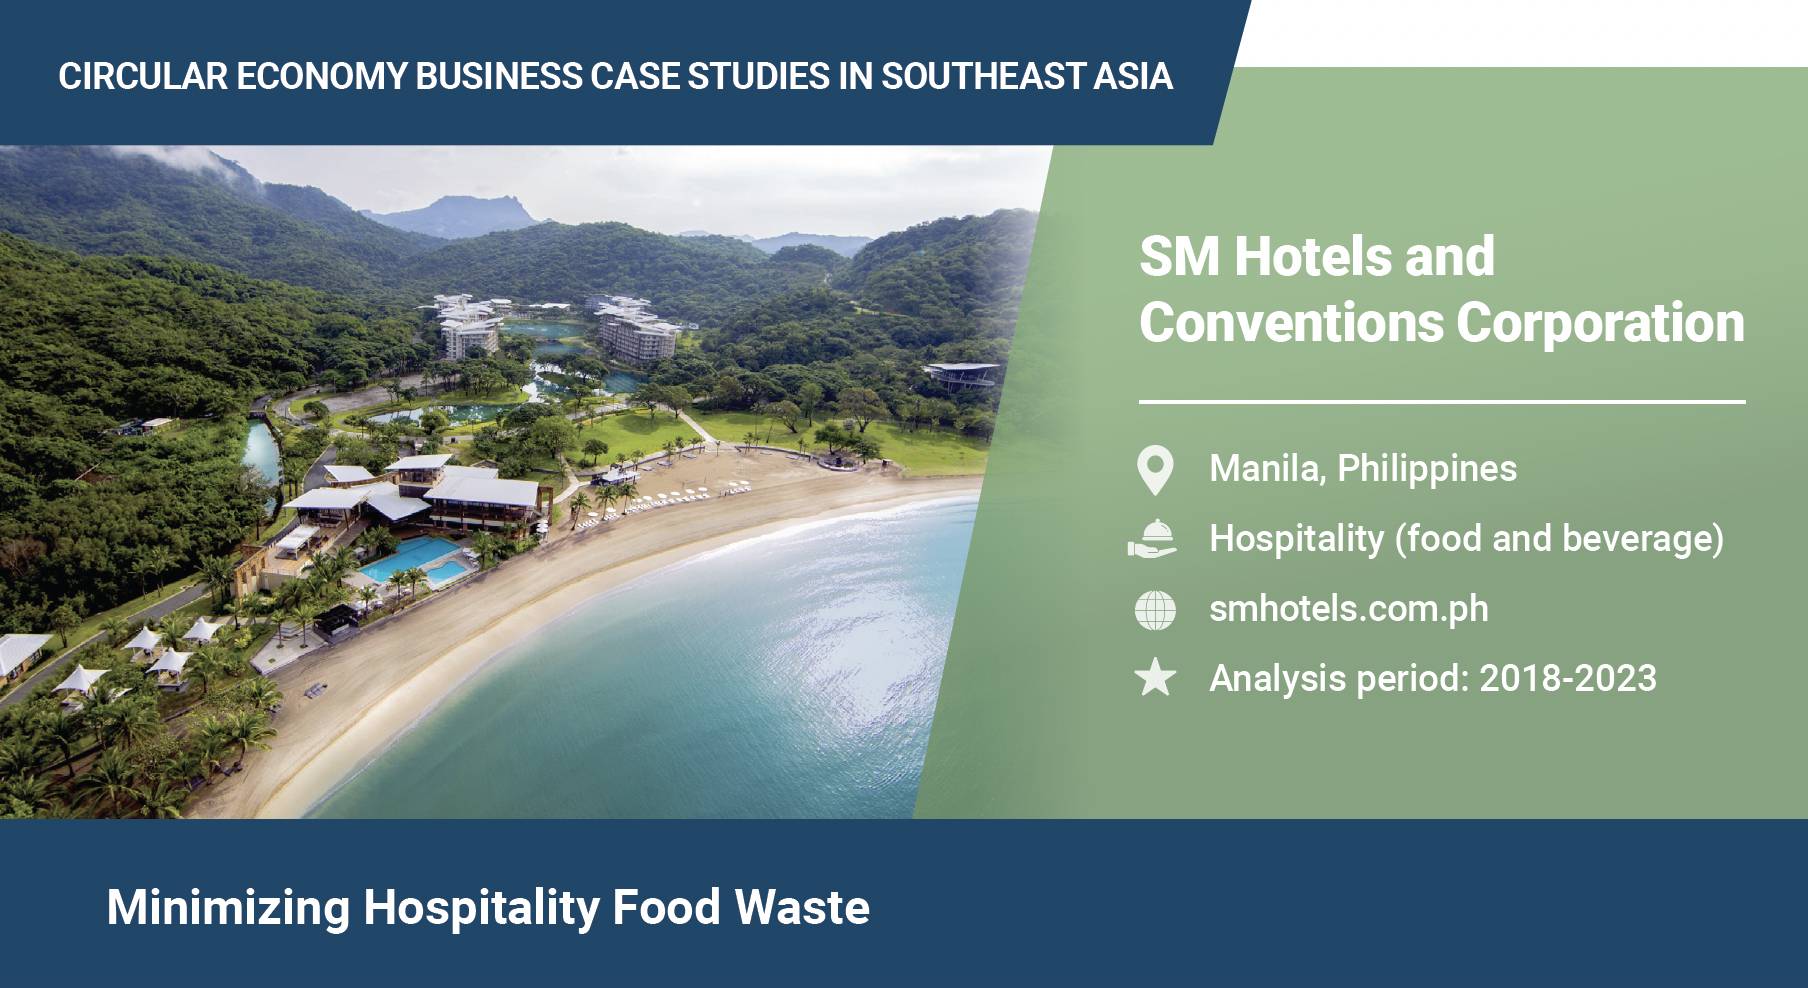 SM Hotels and Conventions Corporation4158